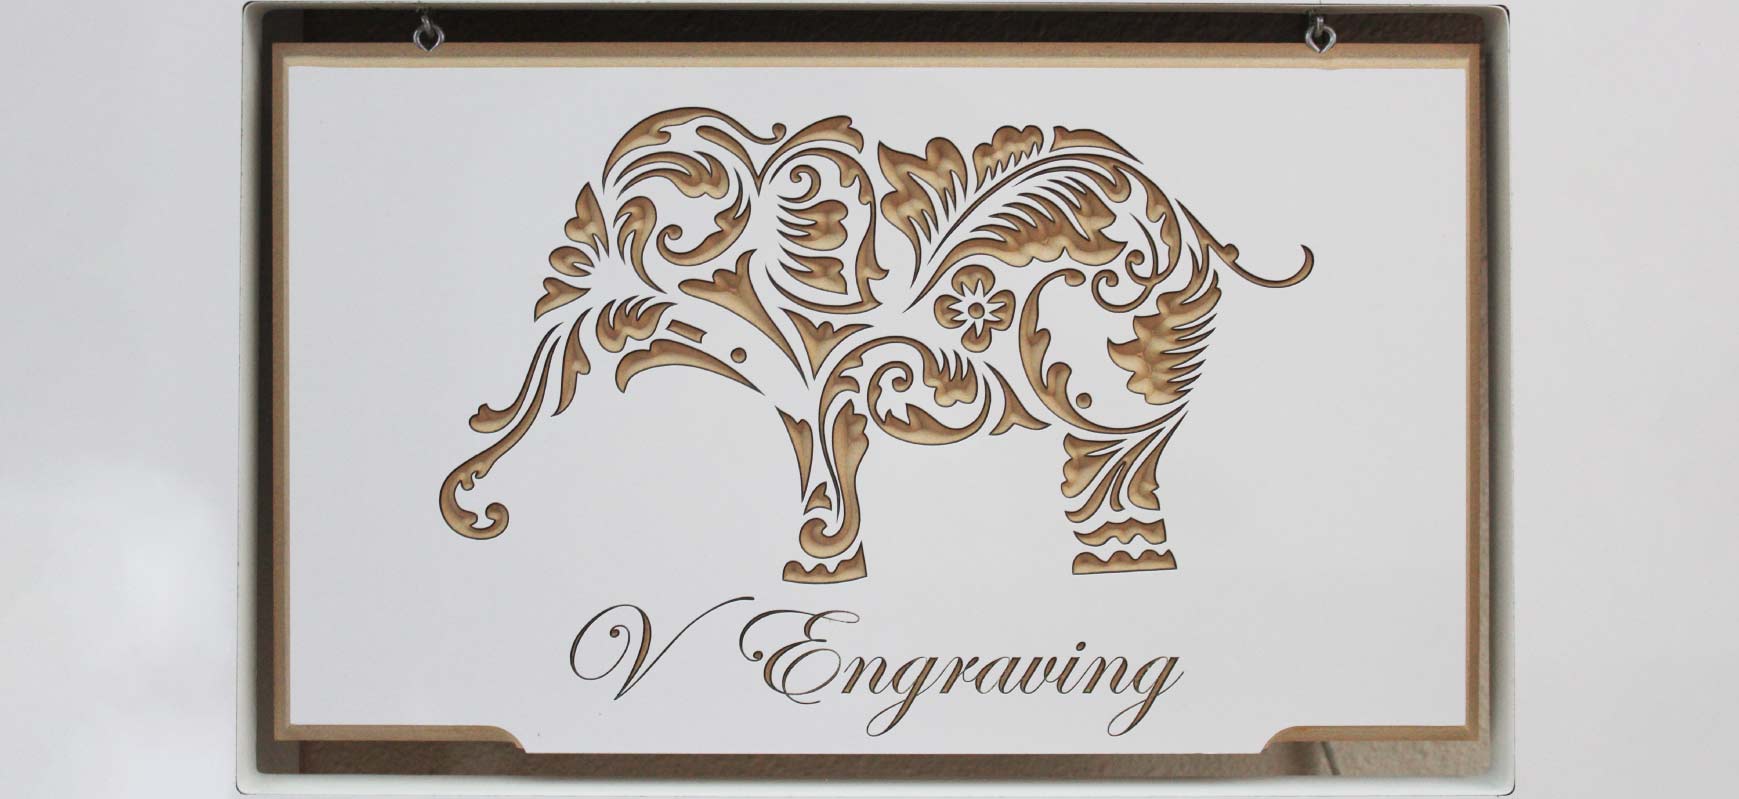 Sophisticated CNC engraving process on wood with text and an elephant silhouette